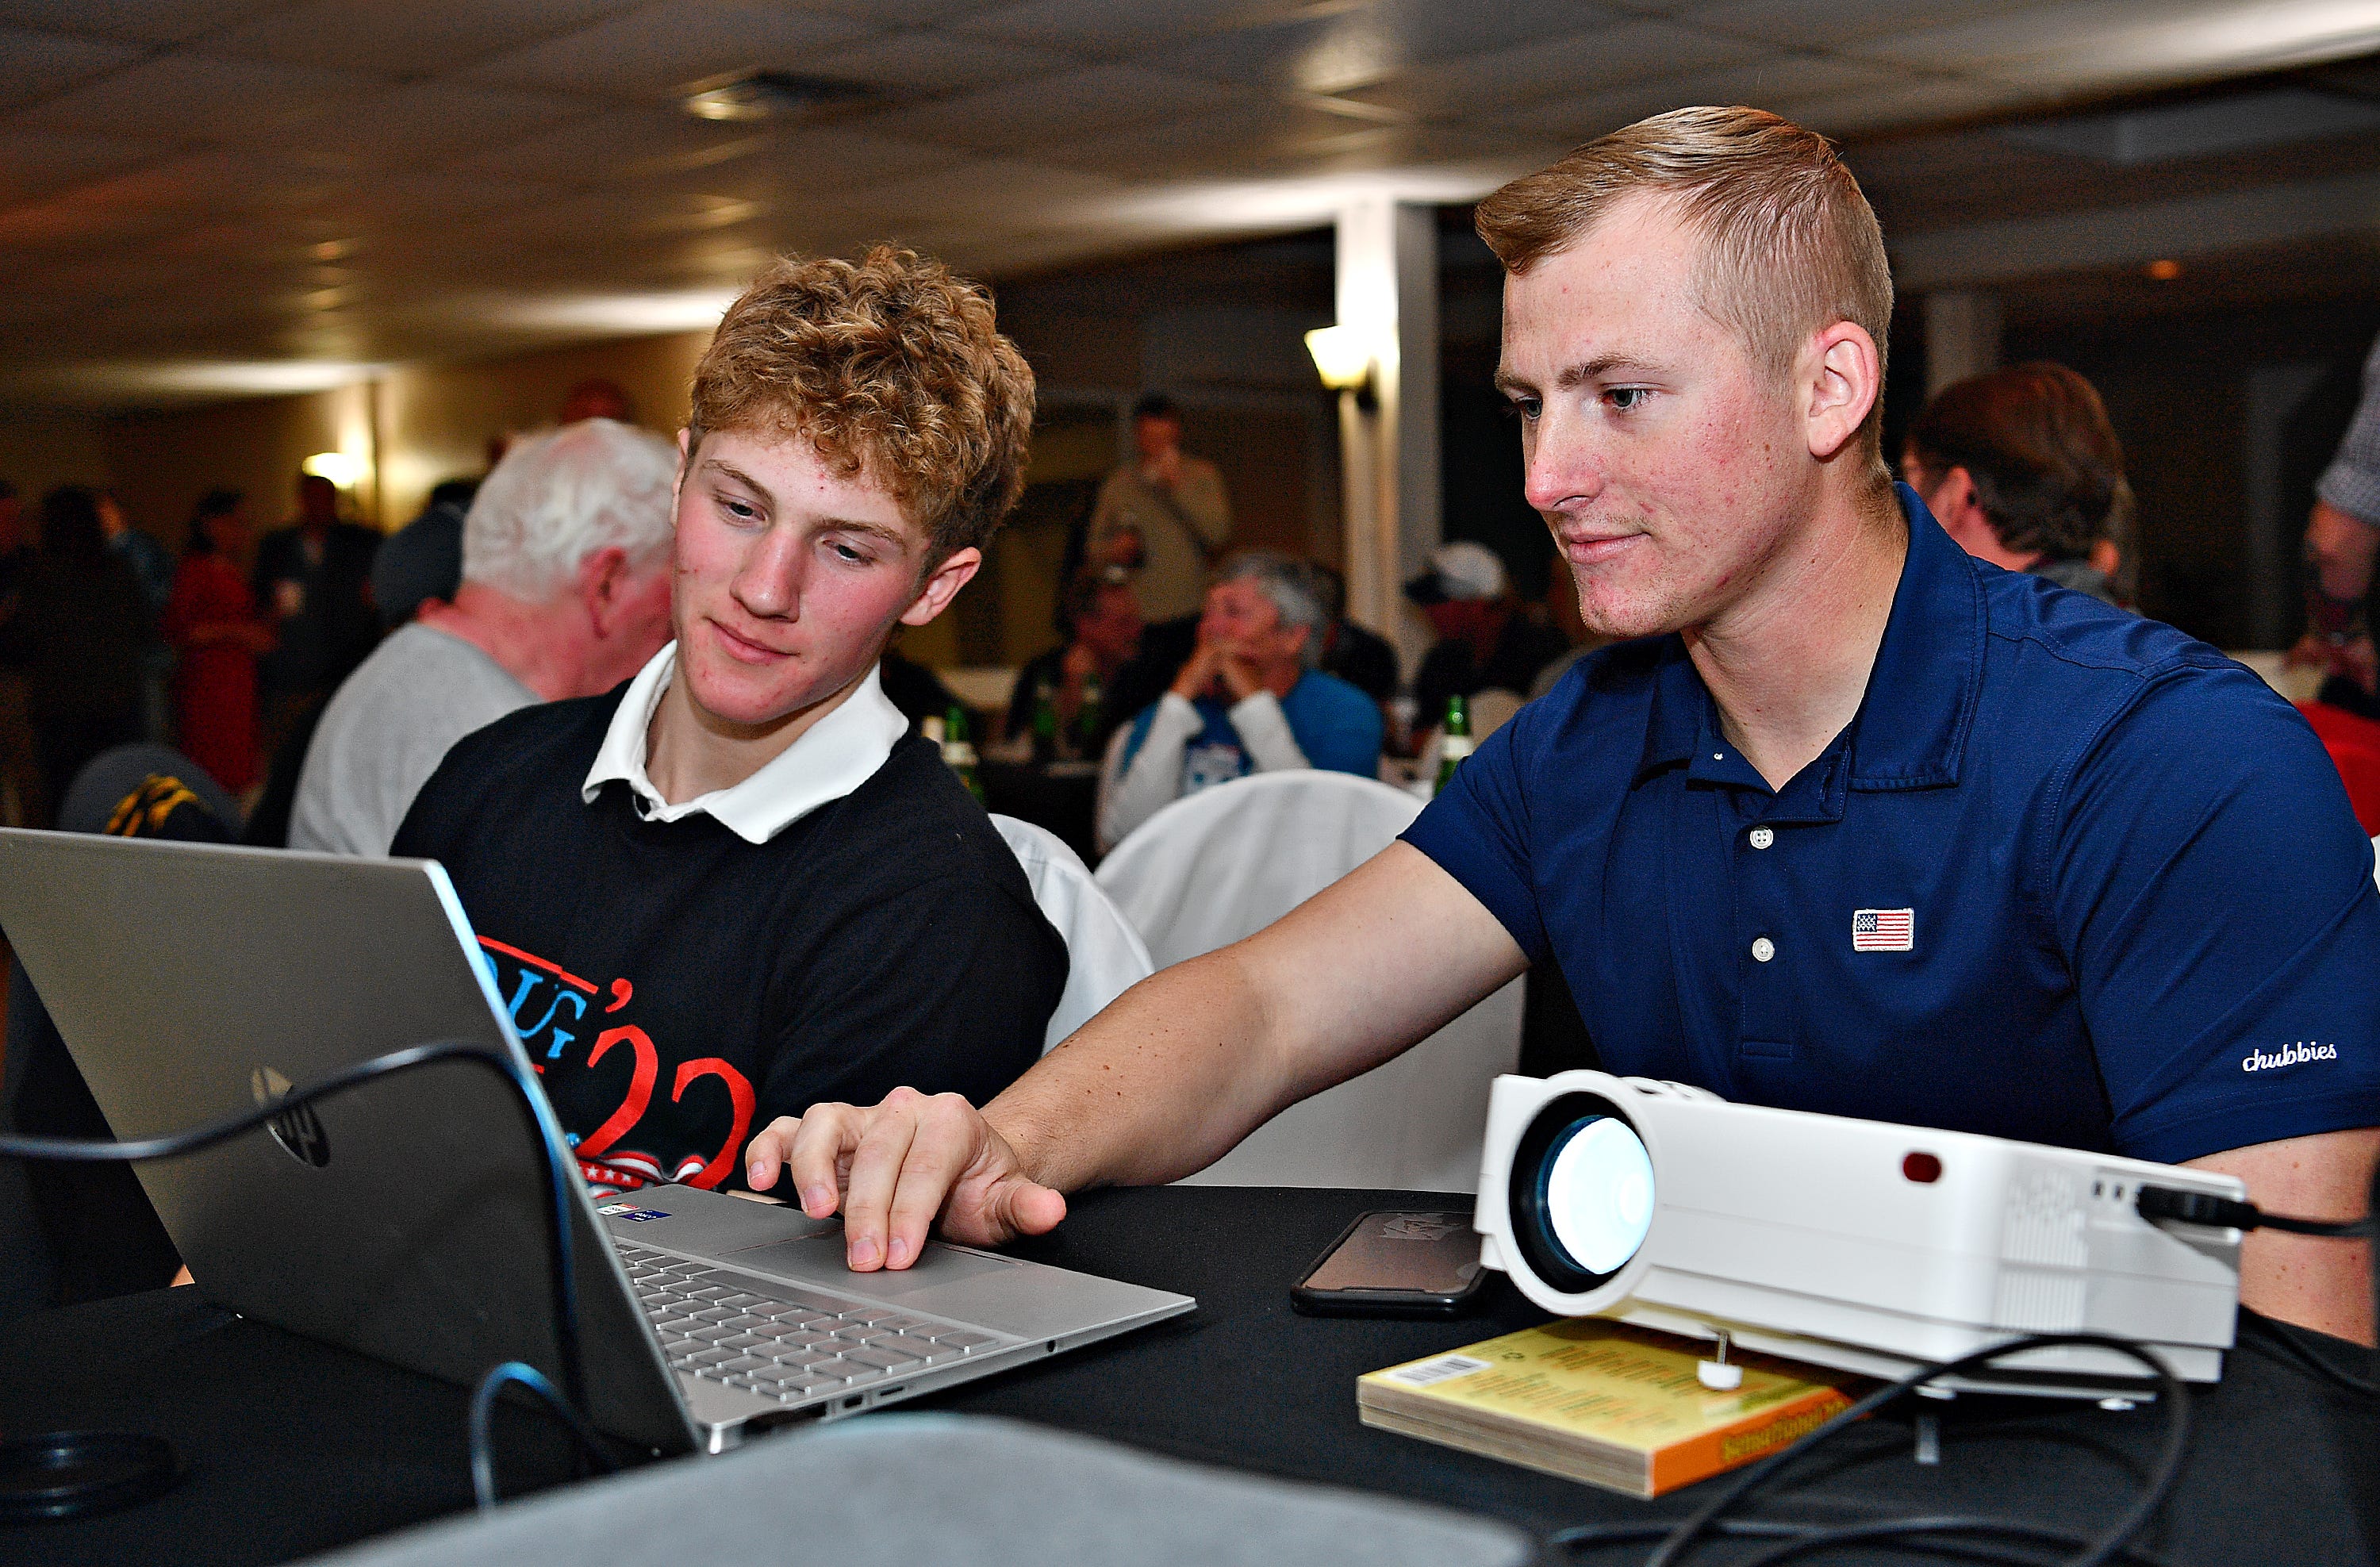 Kyle Deisley, left, of Windsor Township, and Nicholas Shields, of York Township, watch for election results during the York County Republicans watch party at Wisehaven Event Center in Windsor Township, Tuesday, Nov. 8, 2022. Dawn J. Sagert/The York Dispatch